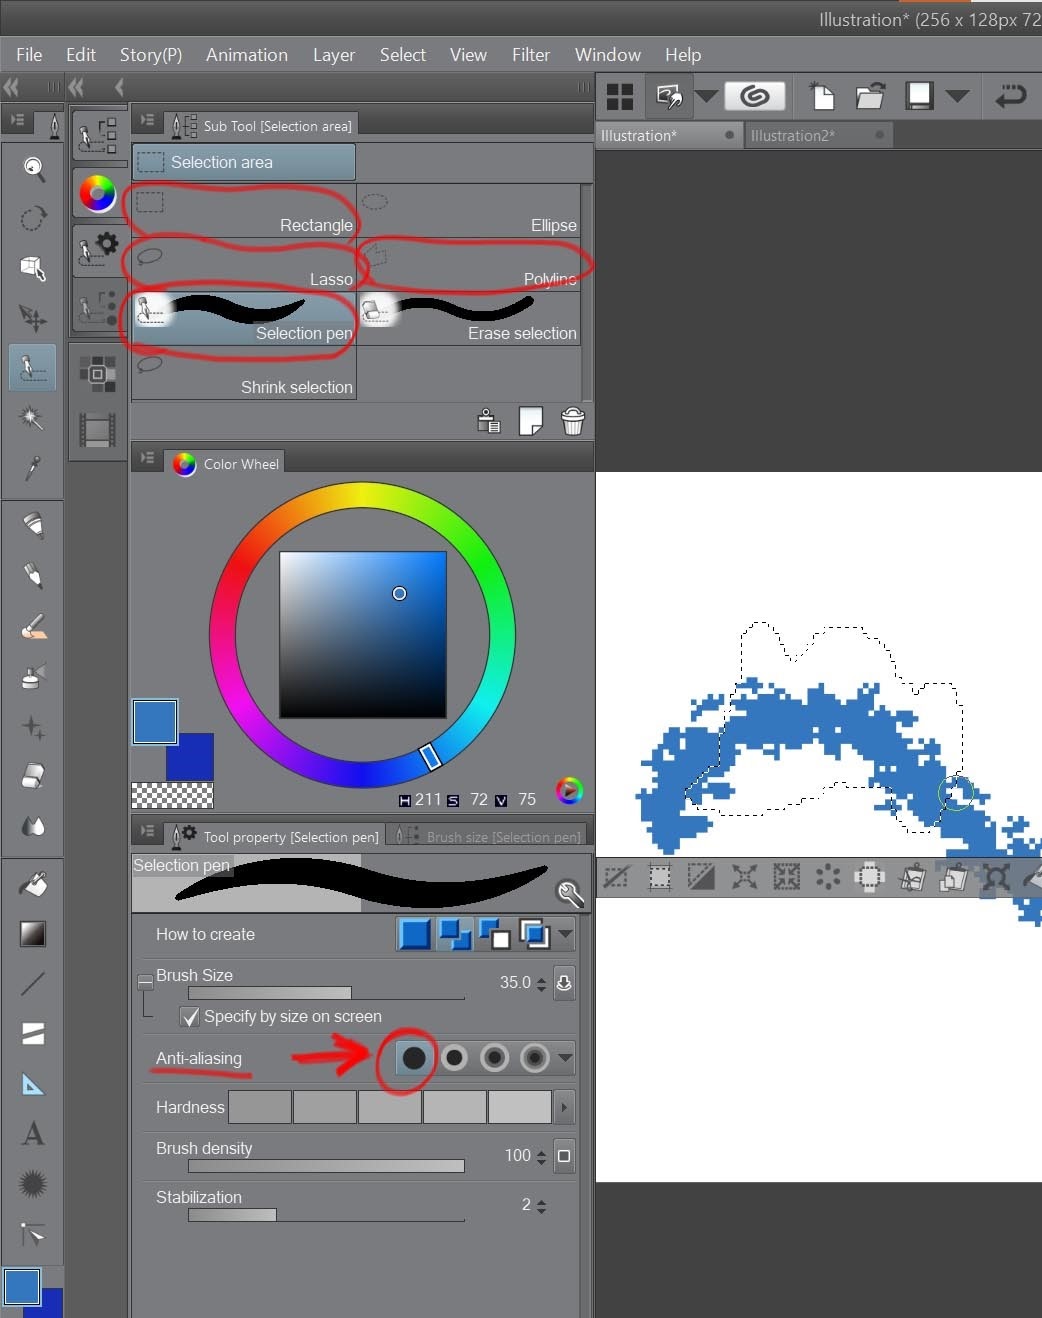 How to create a beautiful Pixel Art environment in Clip Studio Paint: Prepare selection tools